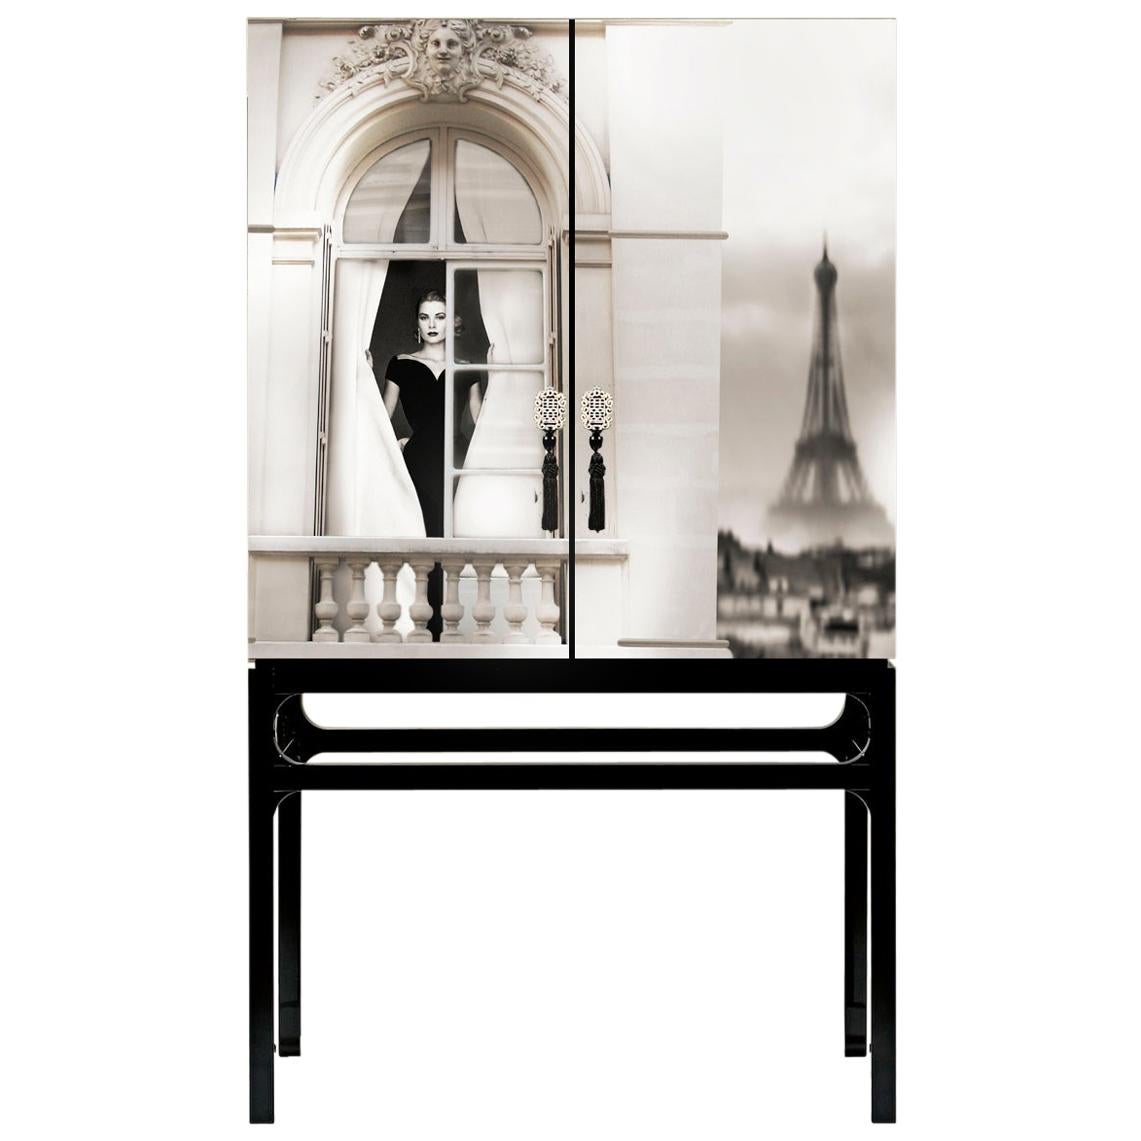 Rive Gauche Grace Kelly Cabinet with Artistic Intervention by Axel Crieger For Sale